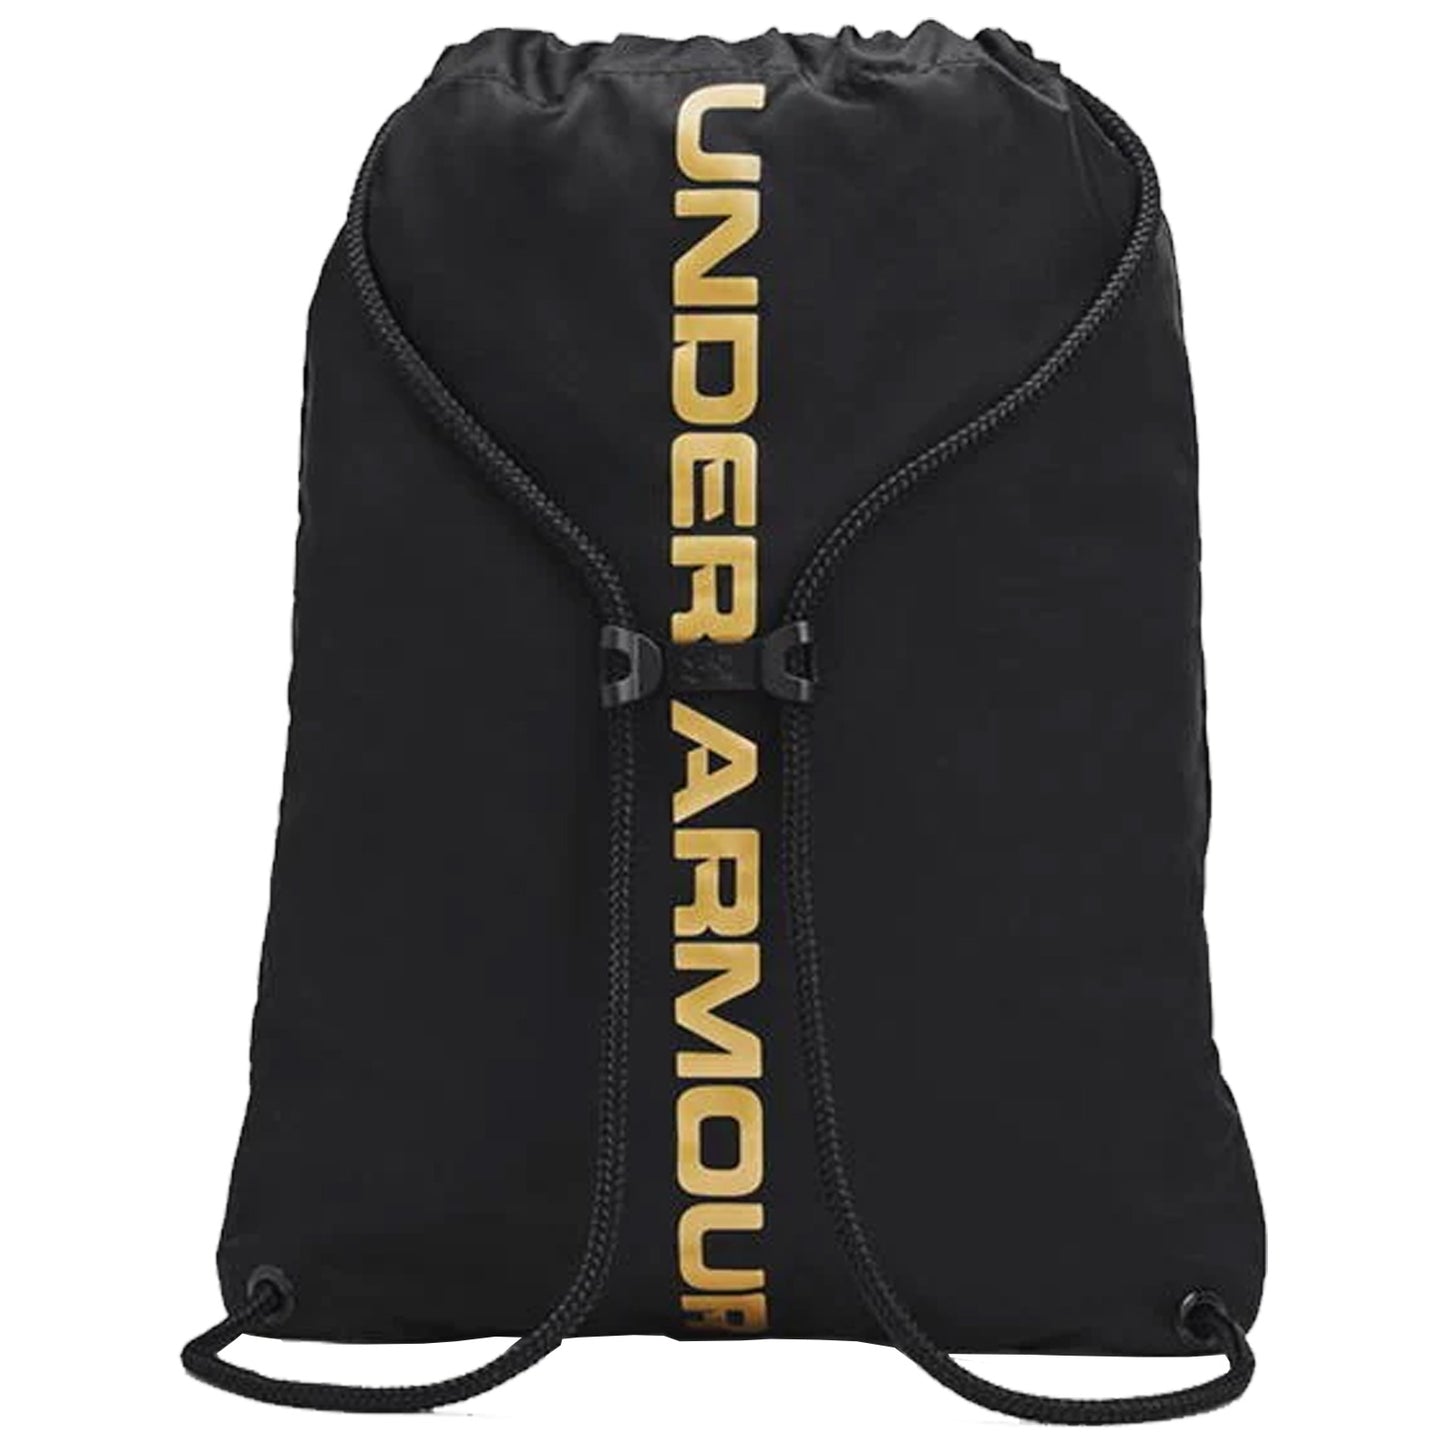 Under Armour Ozsee Sackpack Bag